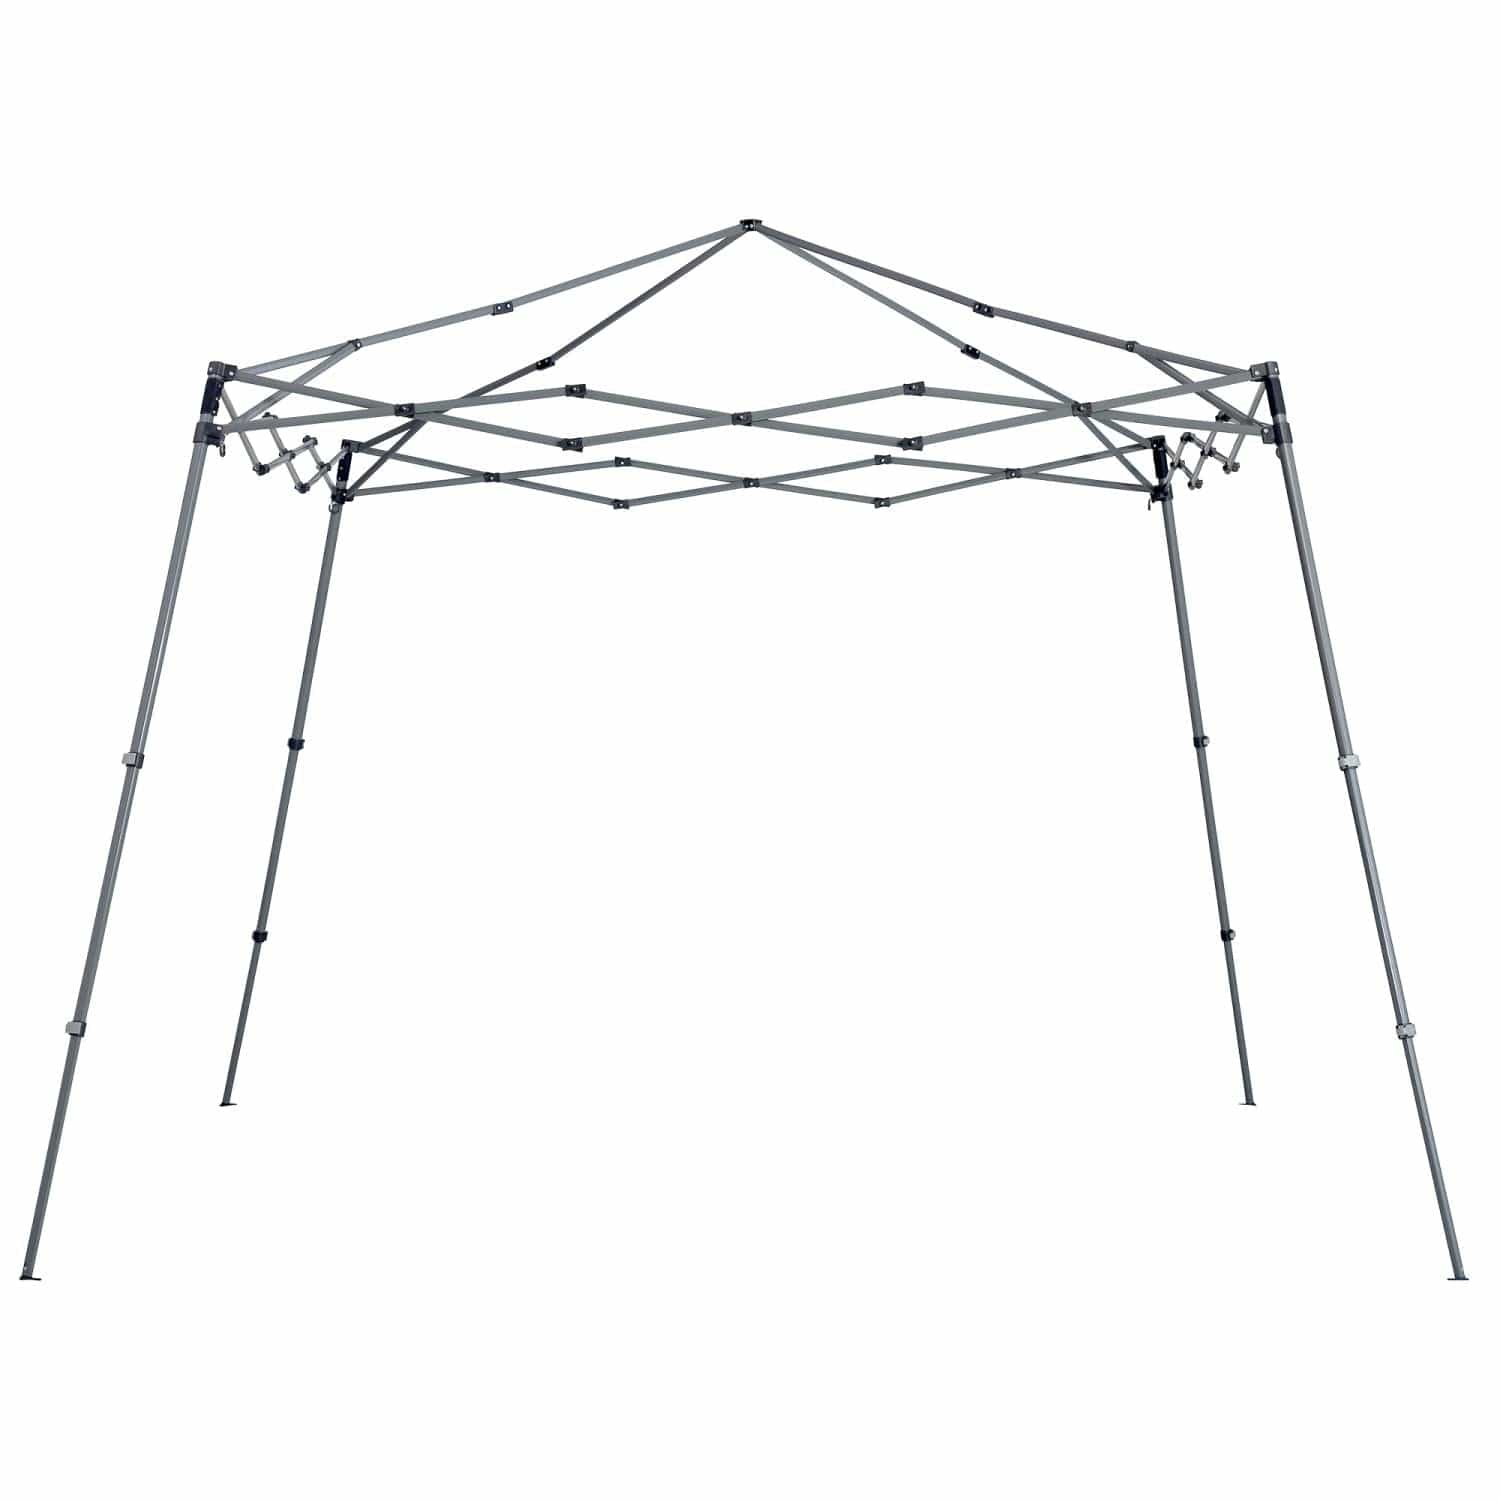 Quik Shade Pop Up Canopies Quik Shade | Solo Steel 64 10' x 10' Slant Leg Canopy - Olive 167546DS